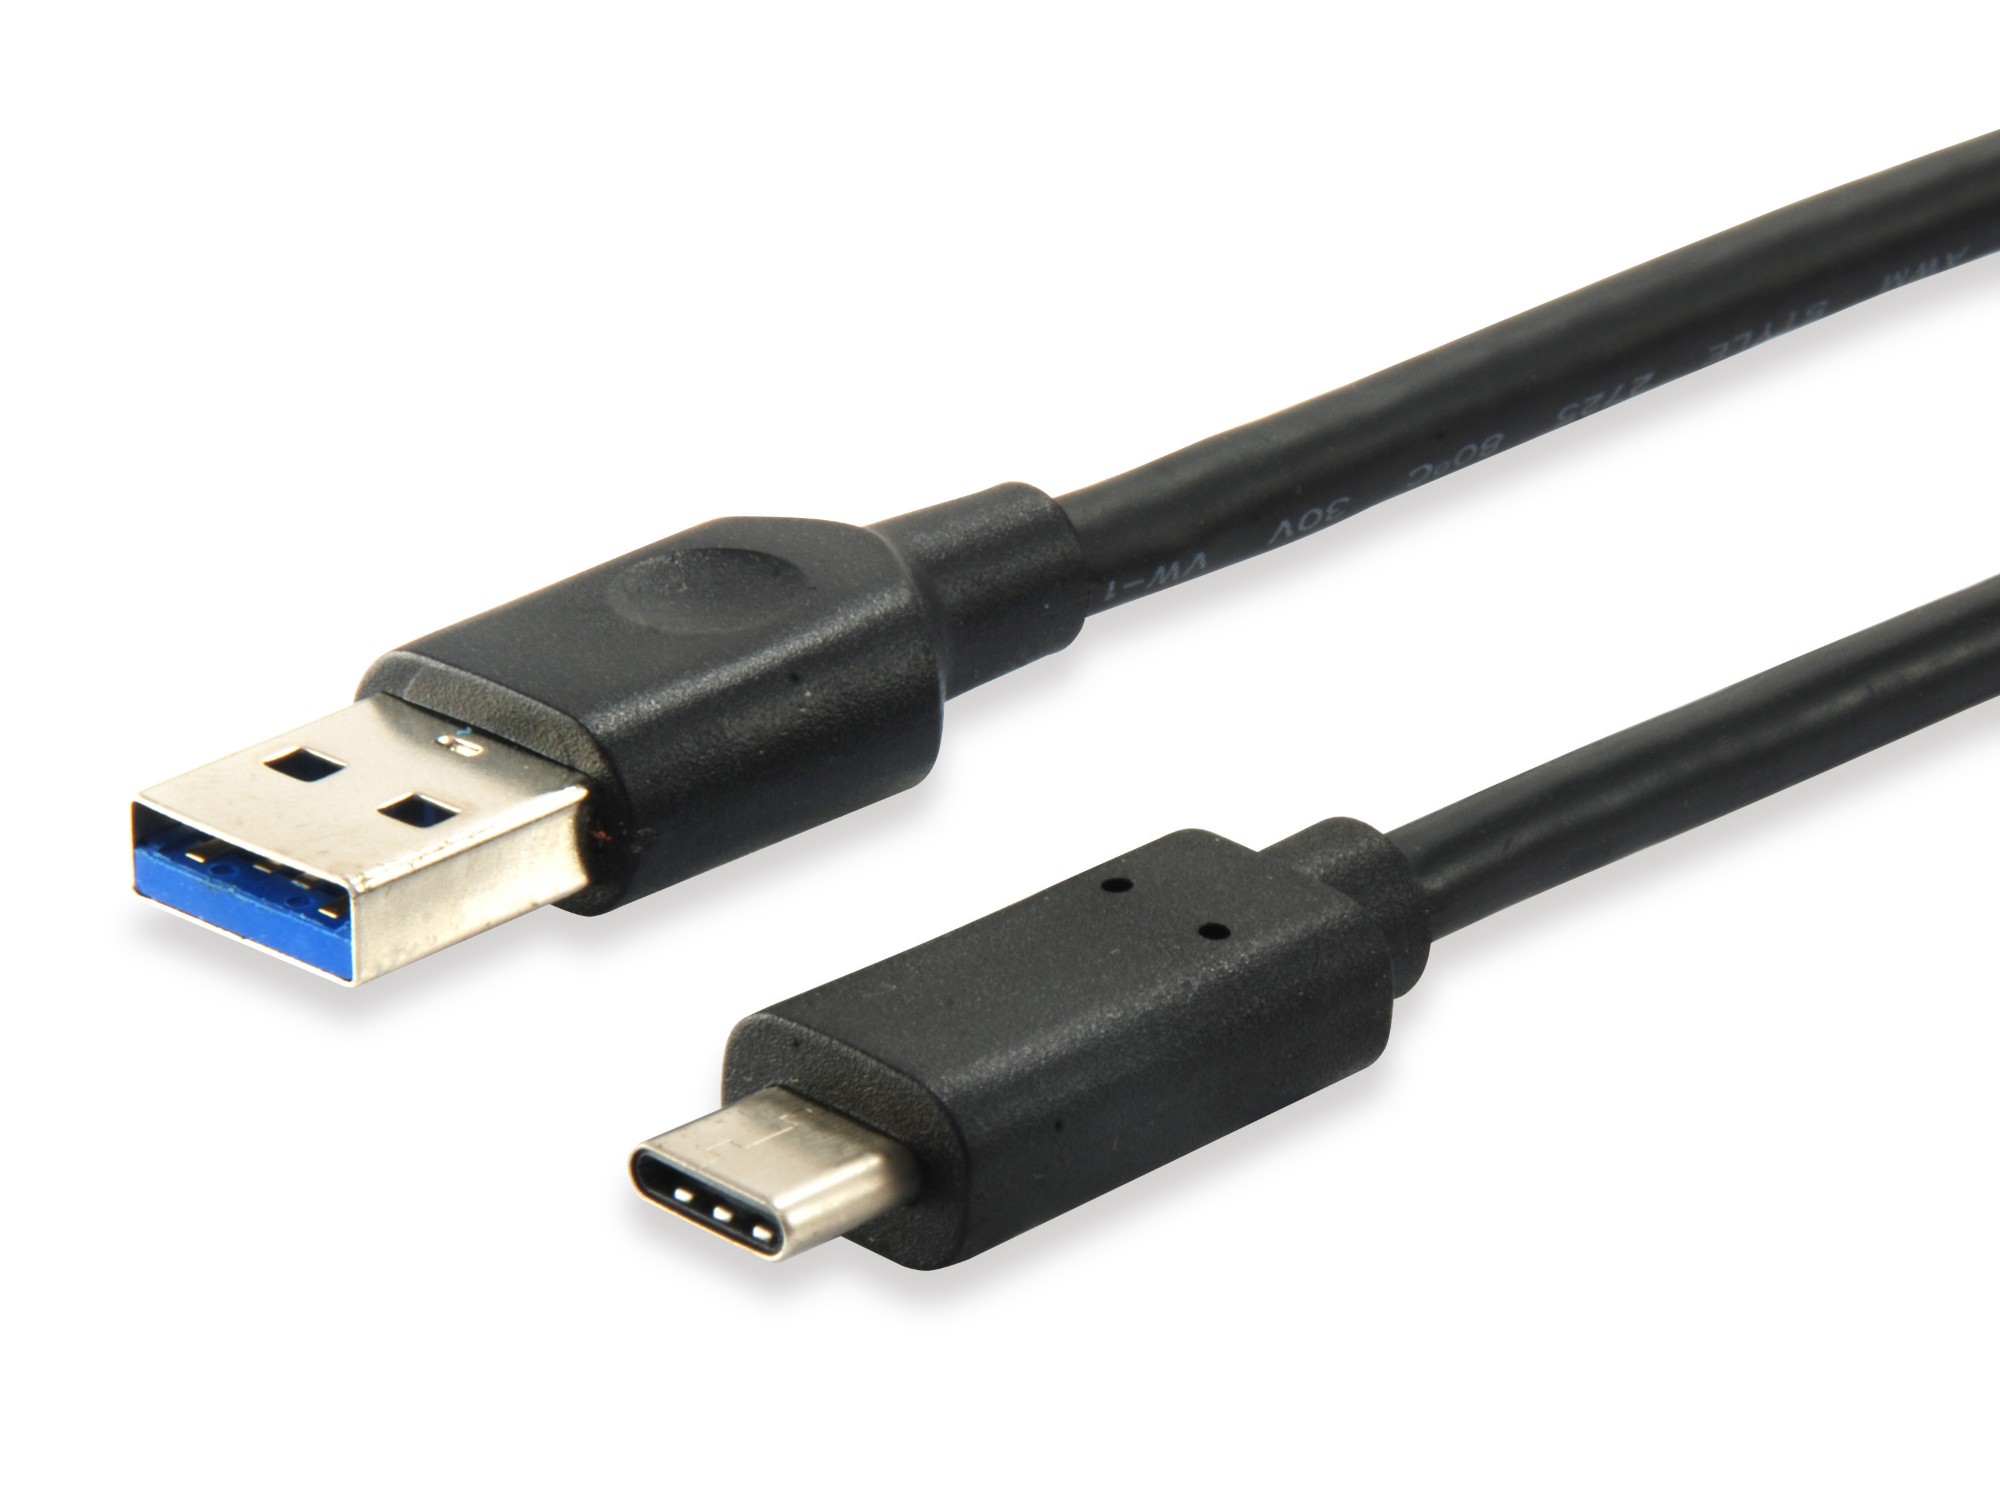 Photos - Cable (video, audio, USB) Equip USB 3.0 Type C to Type A Cable, 1.0m 12834107 